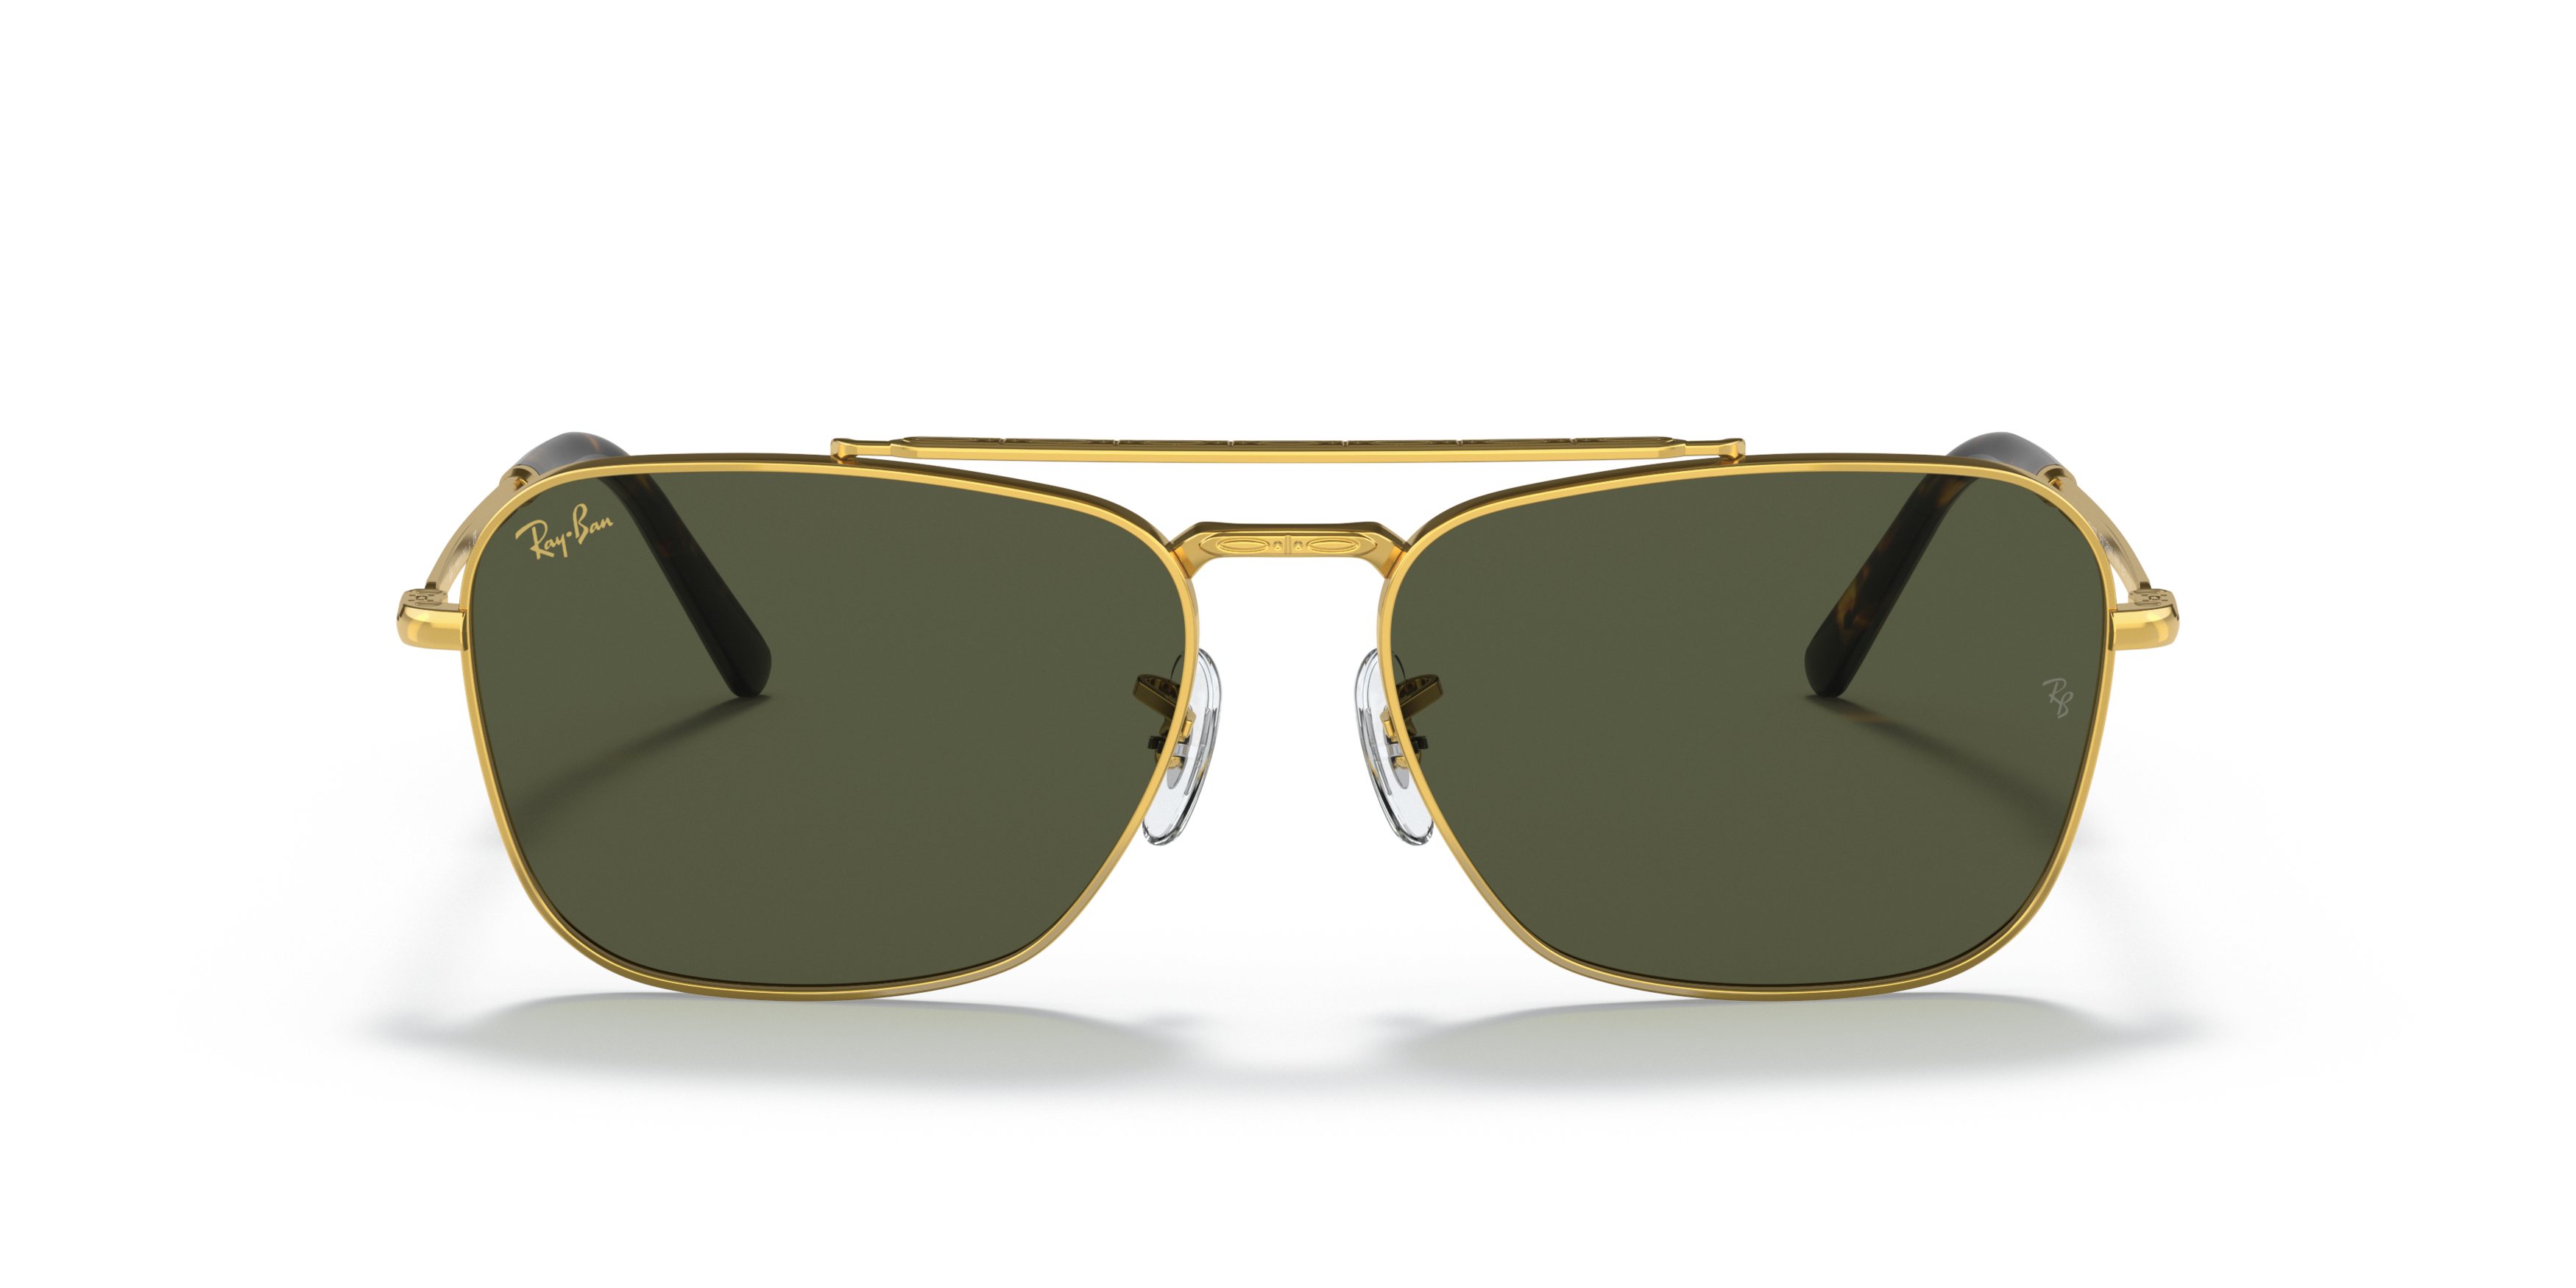 [products.image.front] Ray-Ban New Caravan RB3636 919631